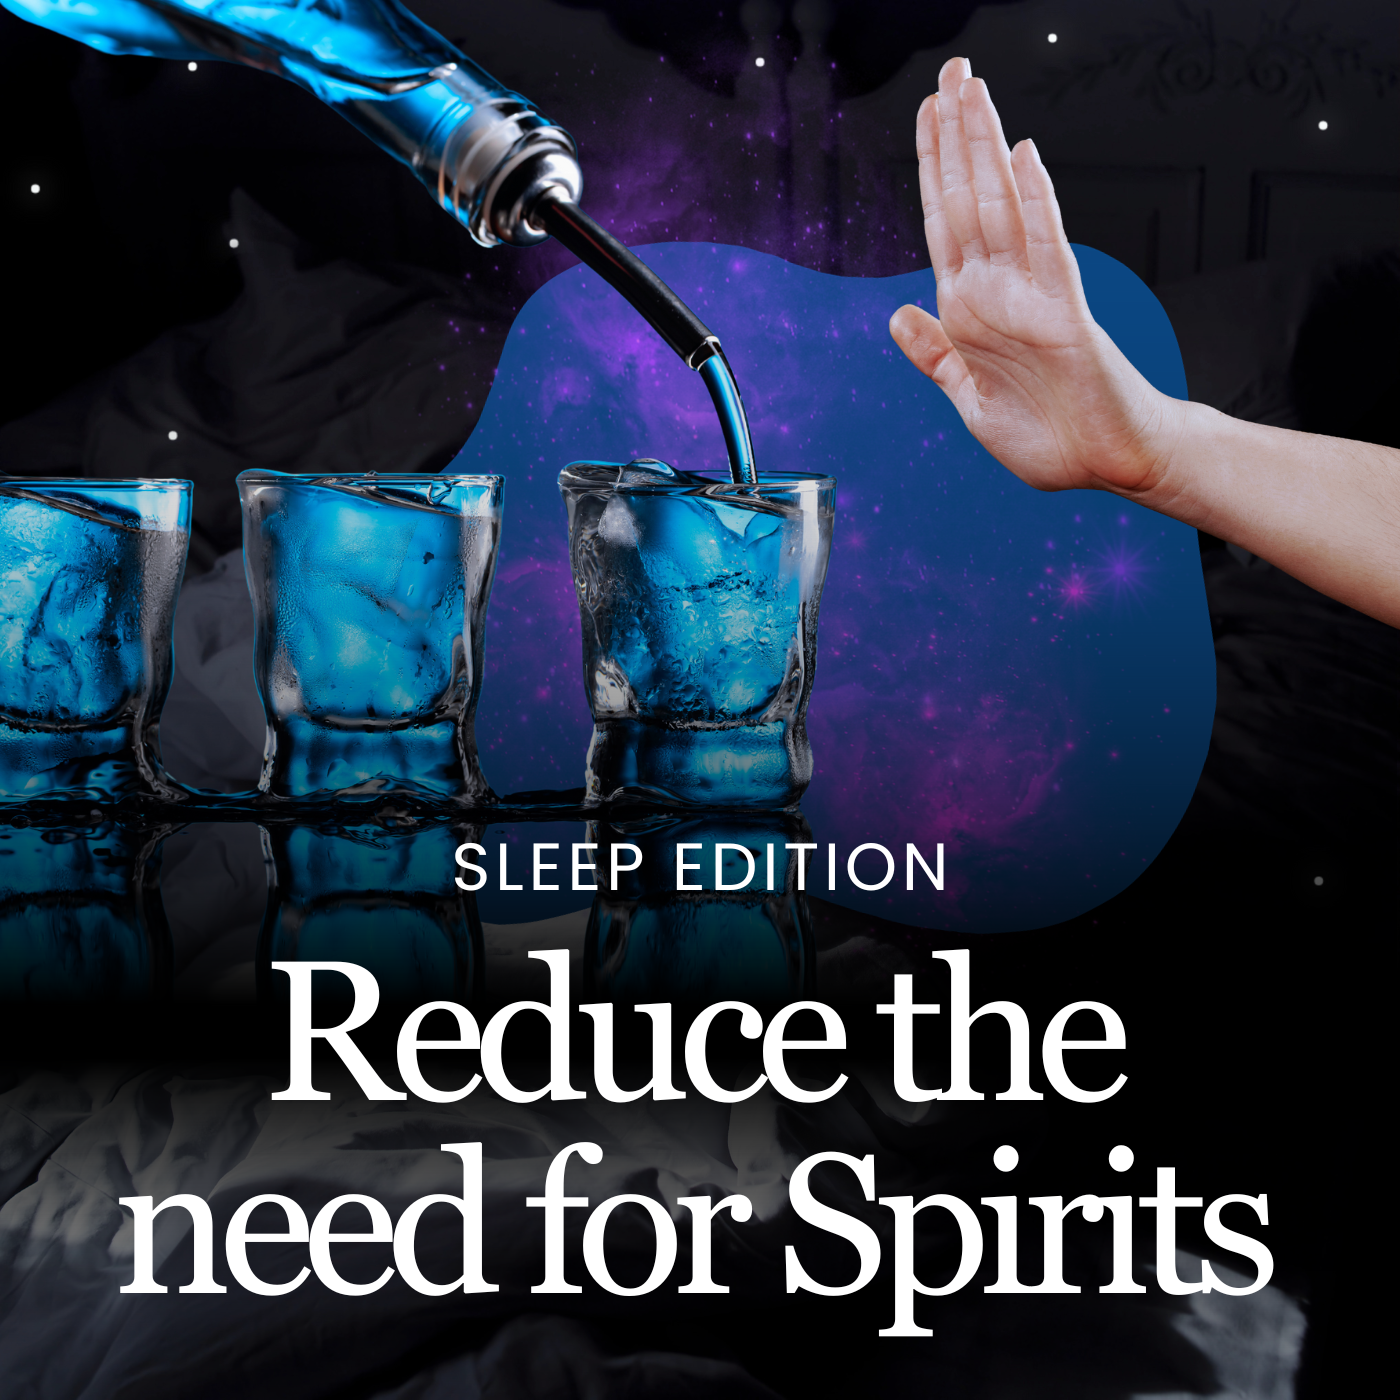 Reduce the need for spirits hypnotherapy - Sleep Edition